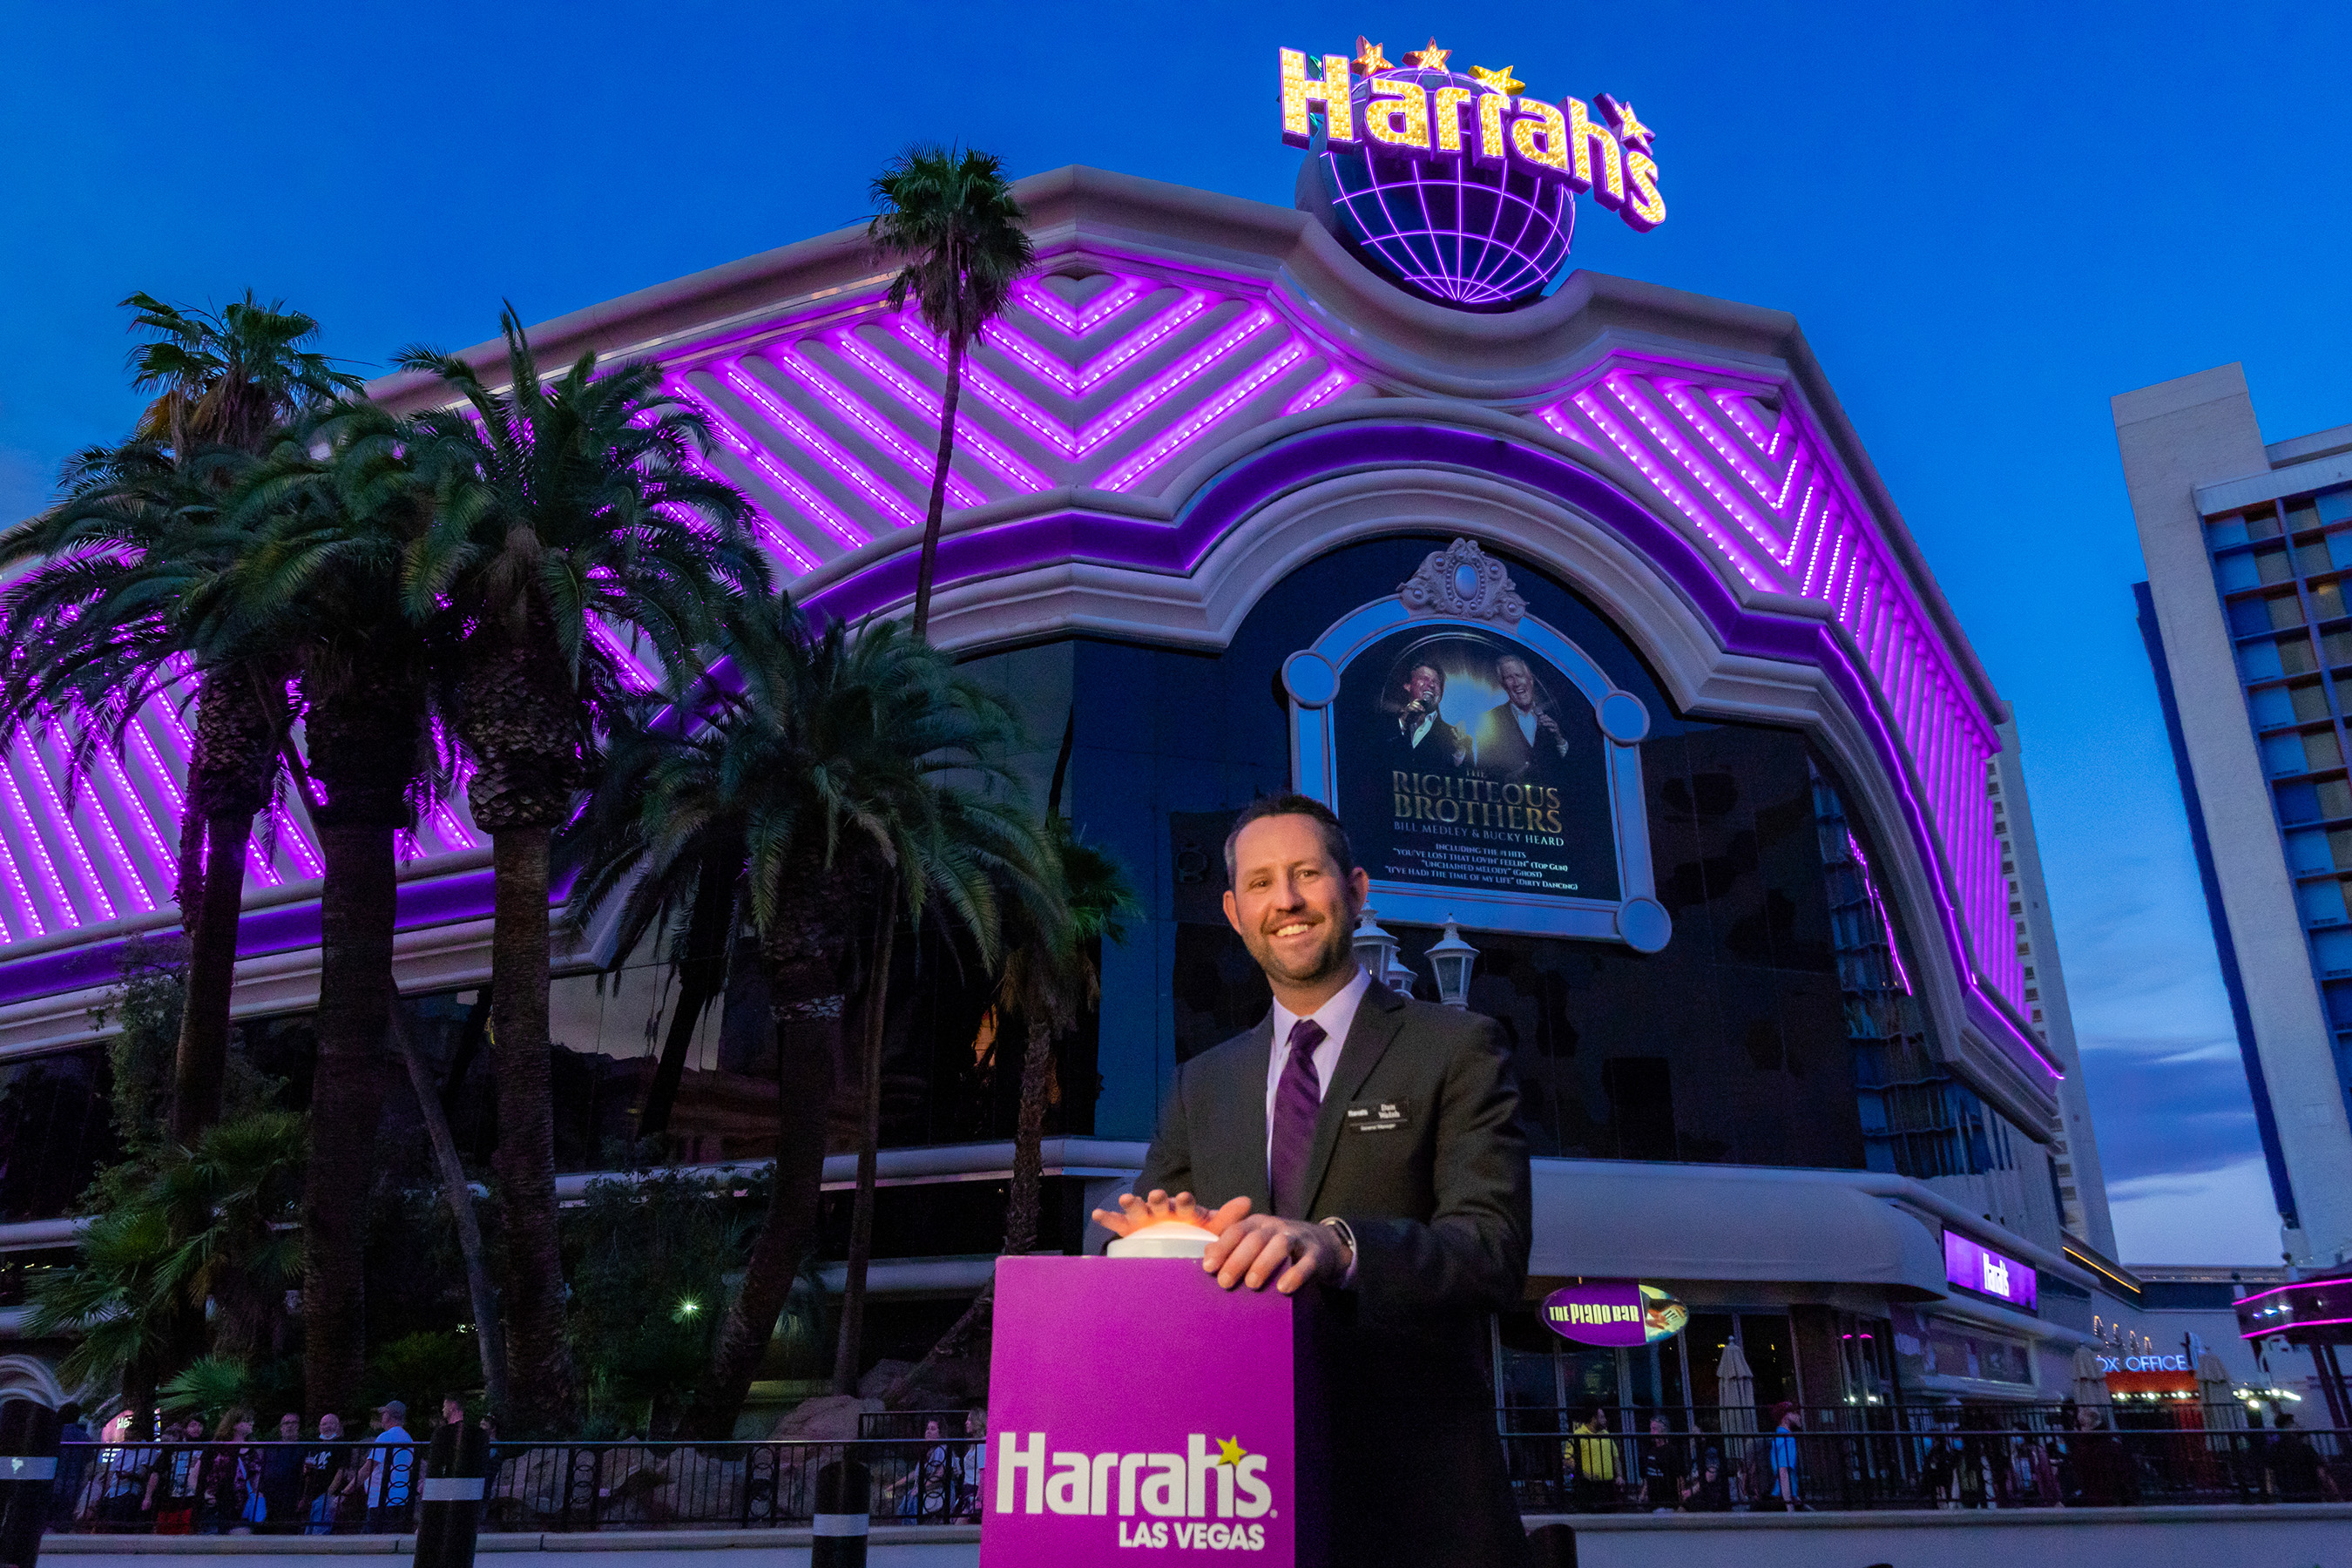 Senior Vice President and General Manager of Harrah's Las Vegas Dan Walsh Switching on the Purple Exterior Lighting